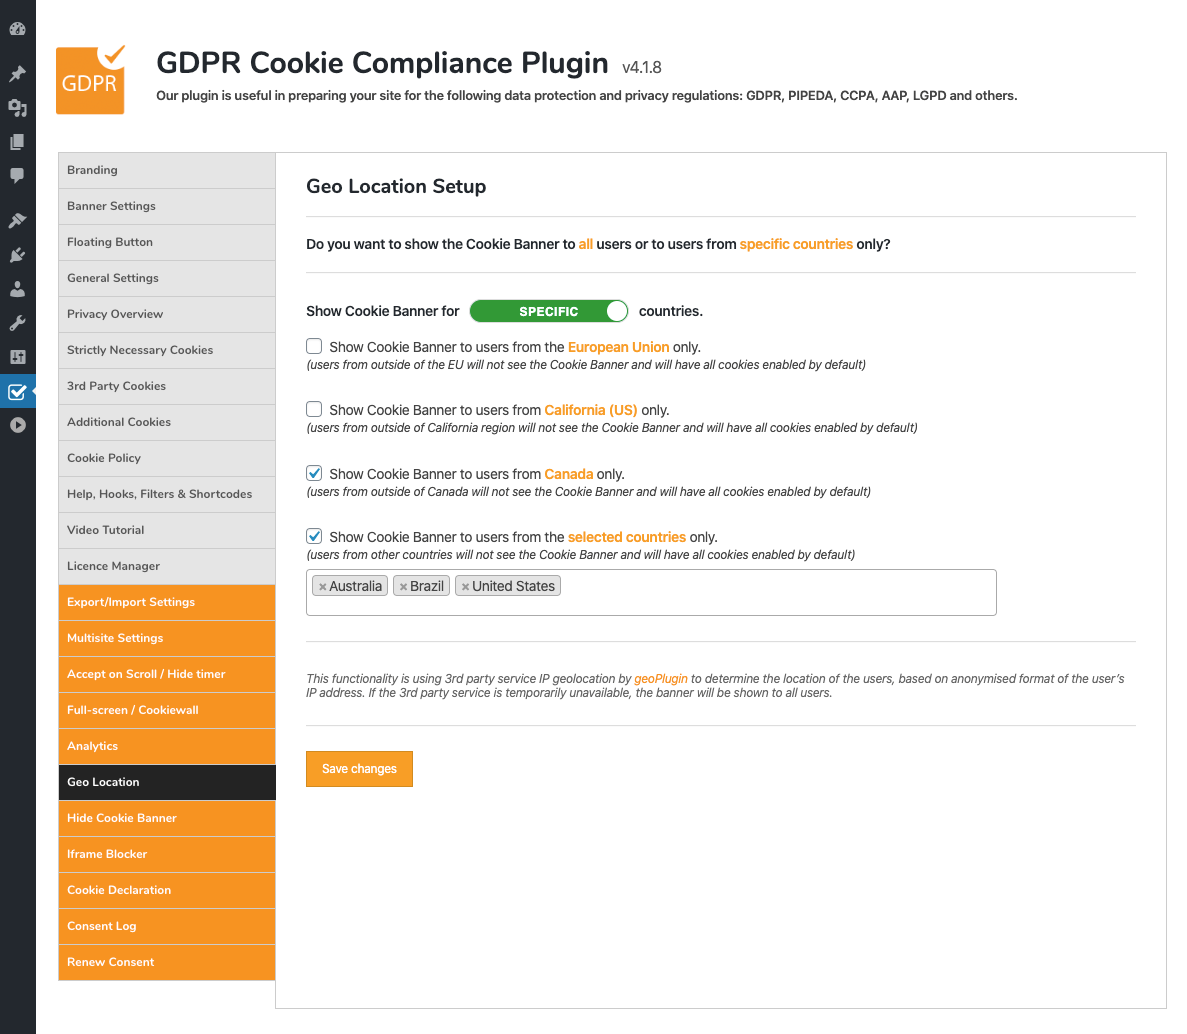 GDPR Cookie Compliance - Admin - Licence Manager